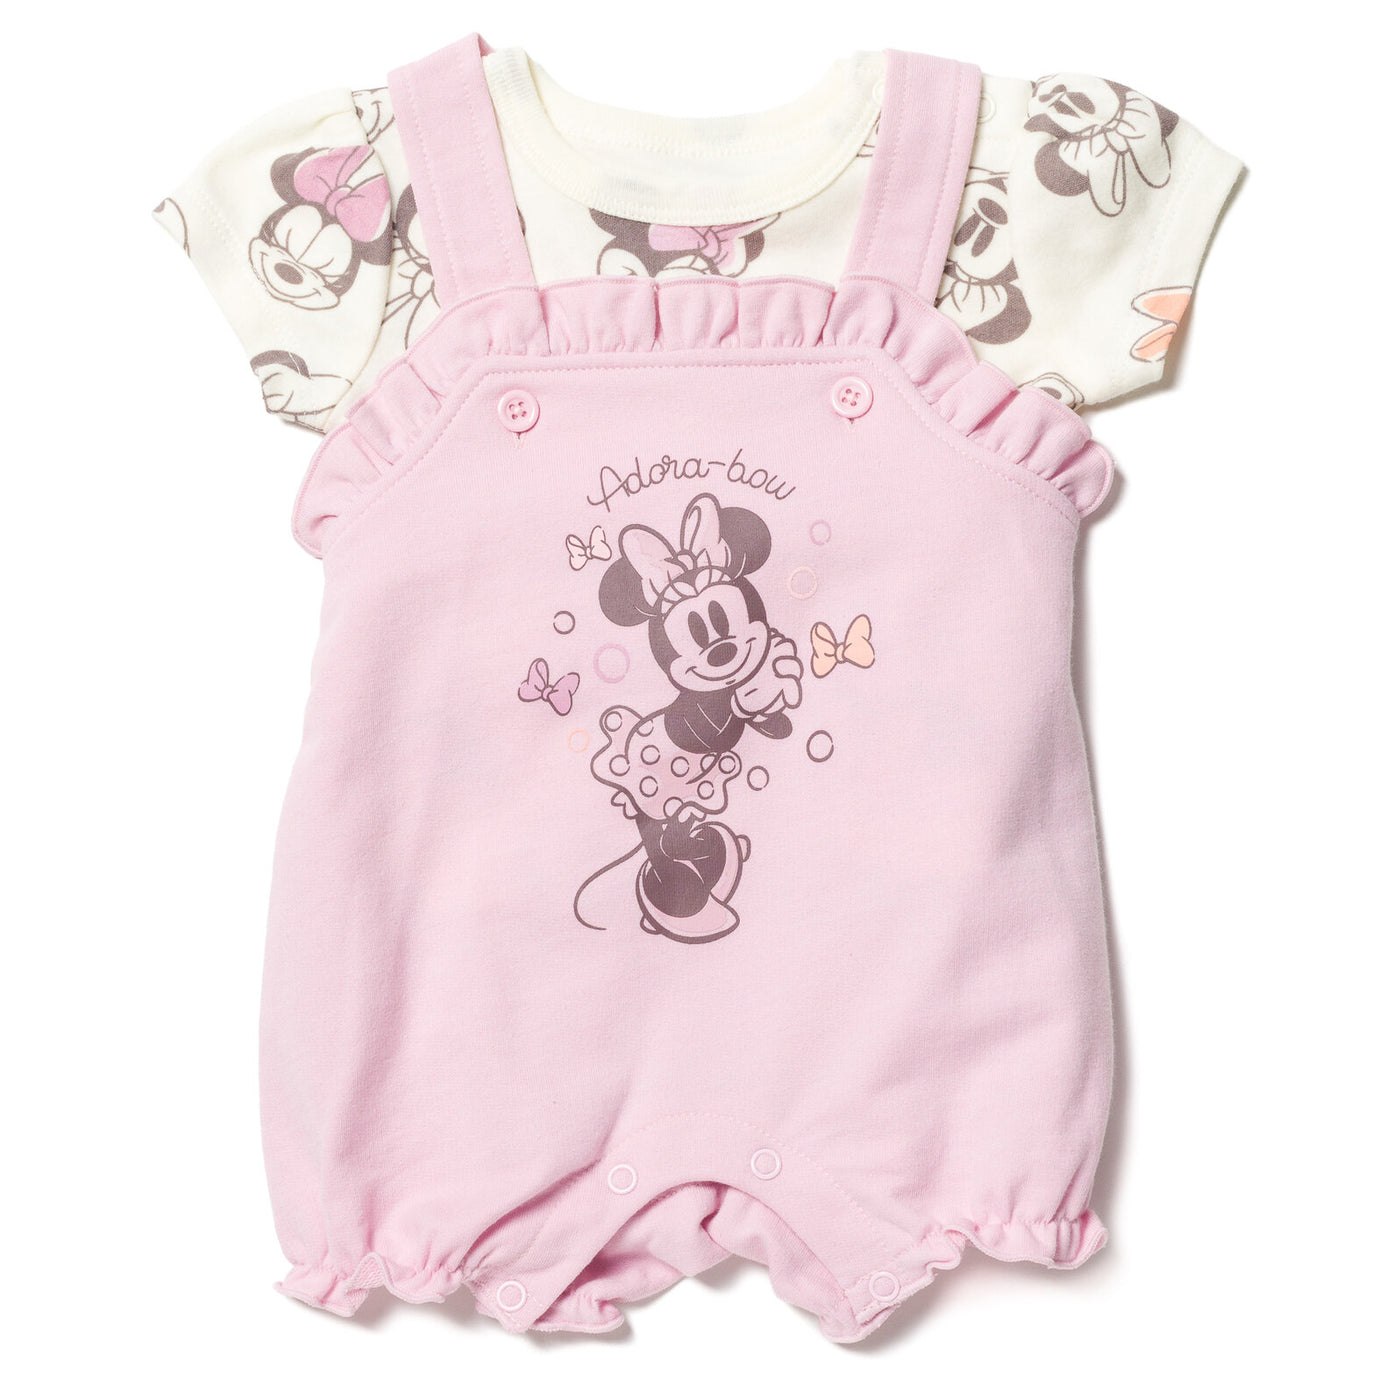 Minnie Mouse French Terry Short Overalls T-Shirt and Hat 3 Piece Outfit Set